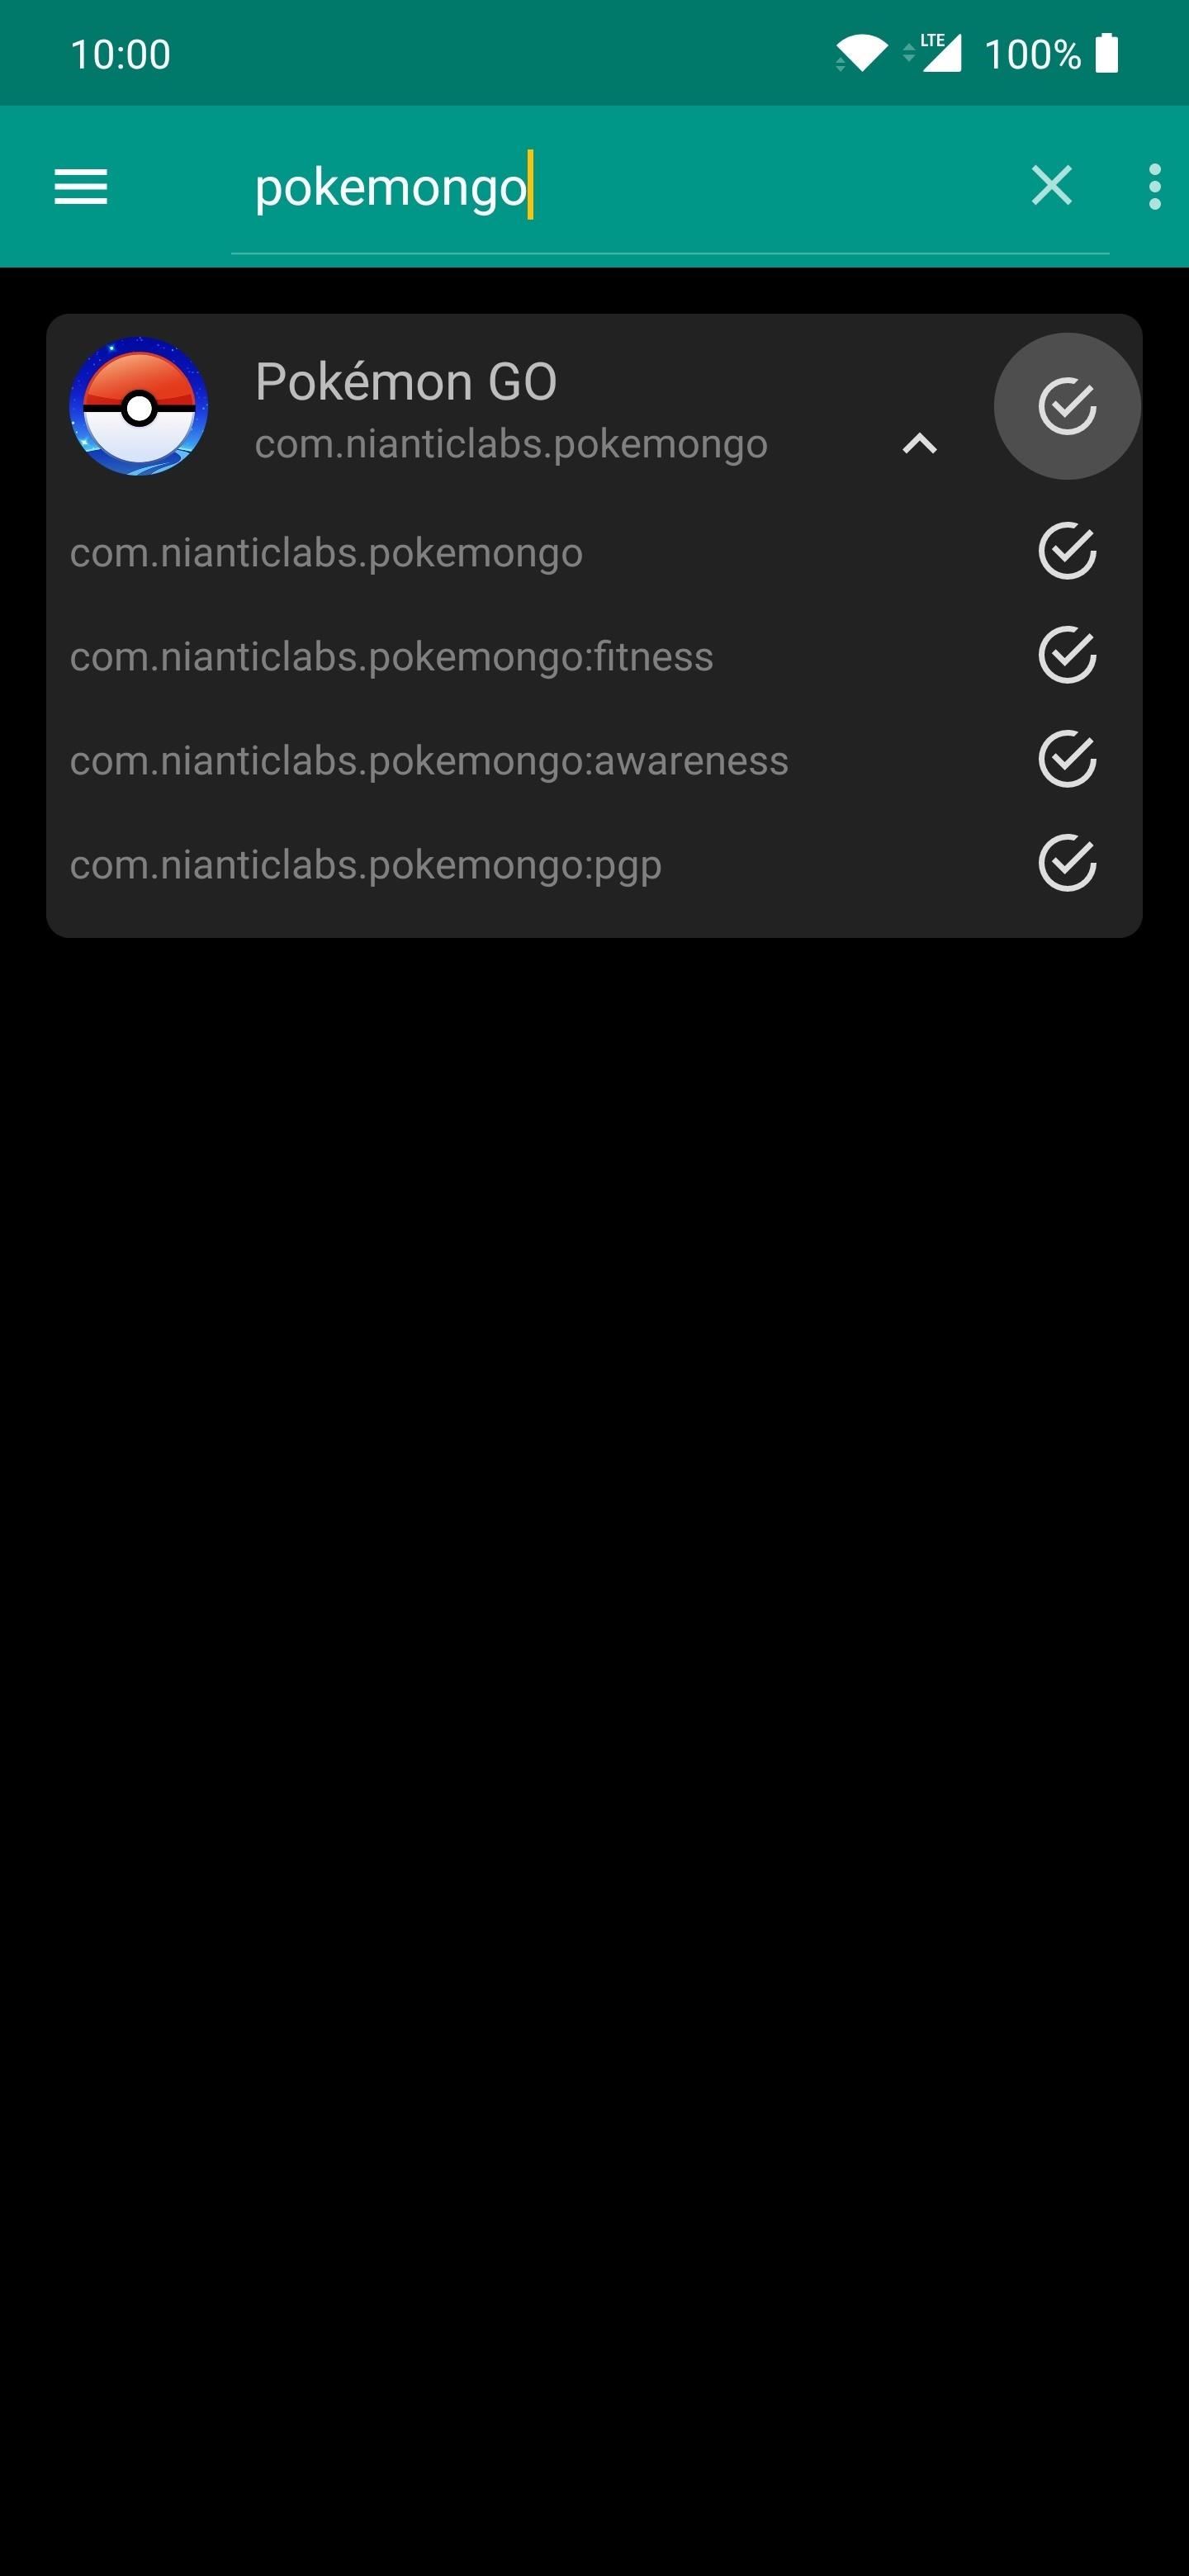 How to Make Pokémon GO Work When You Have TWRP Installed